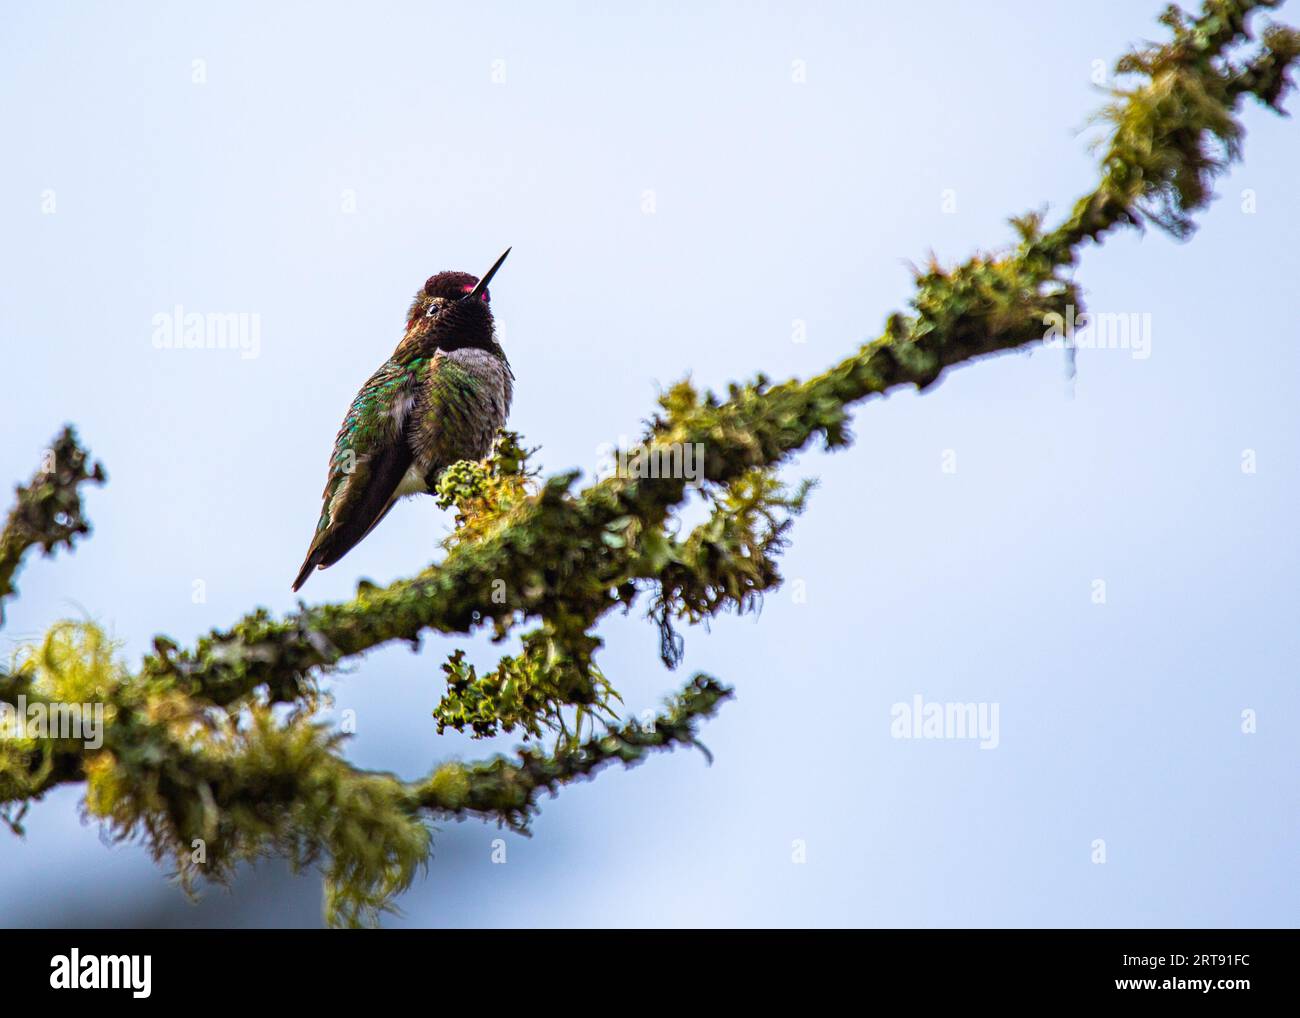 Anna's Hummingbird (Calypte anna) spotted outdoors in California Stock Photo